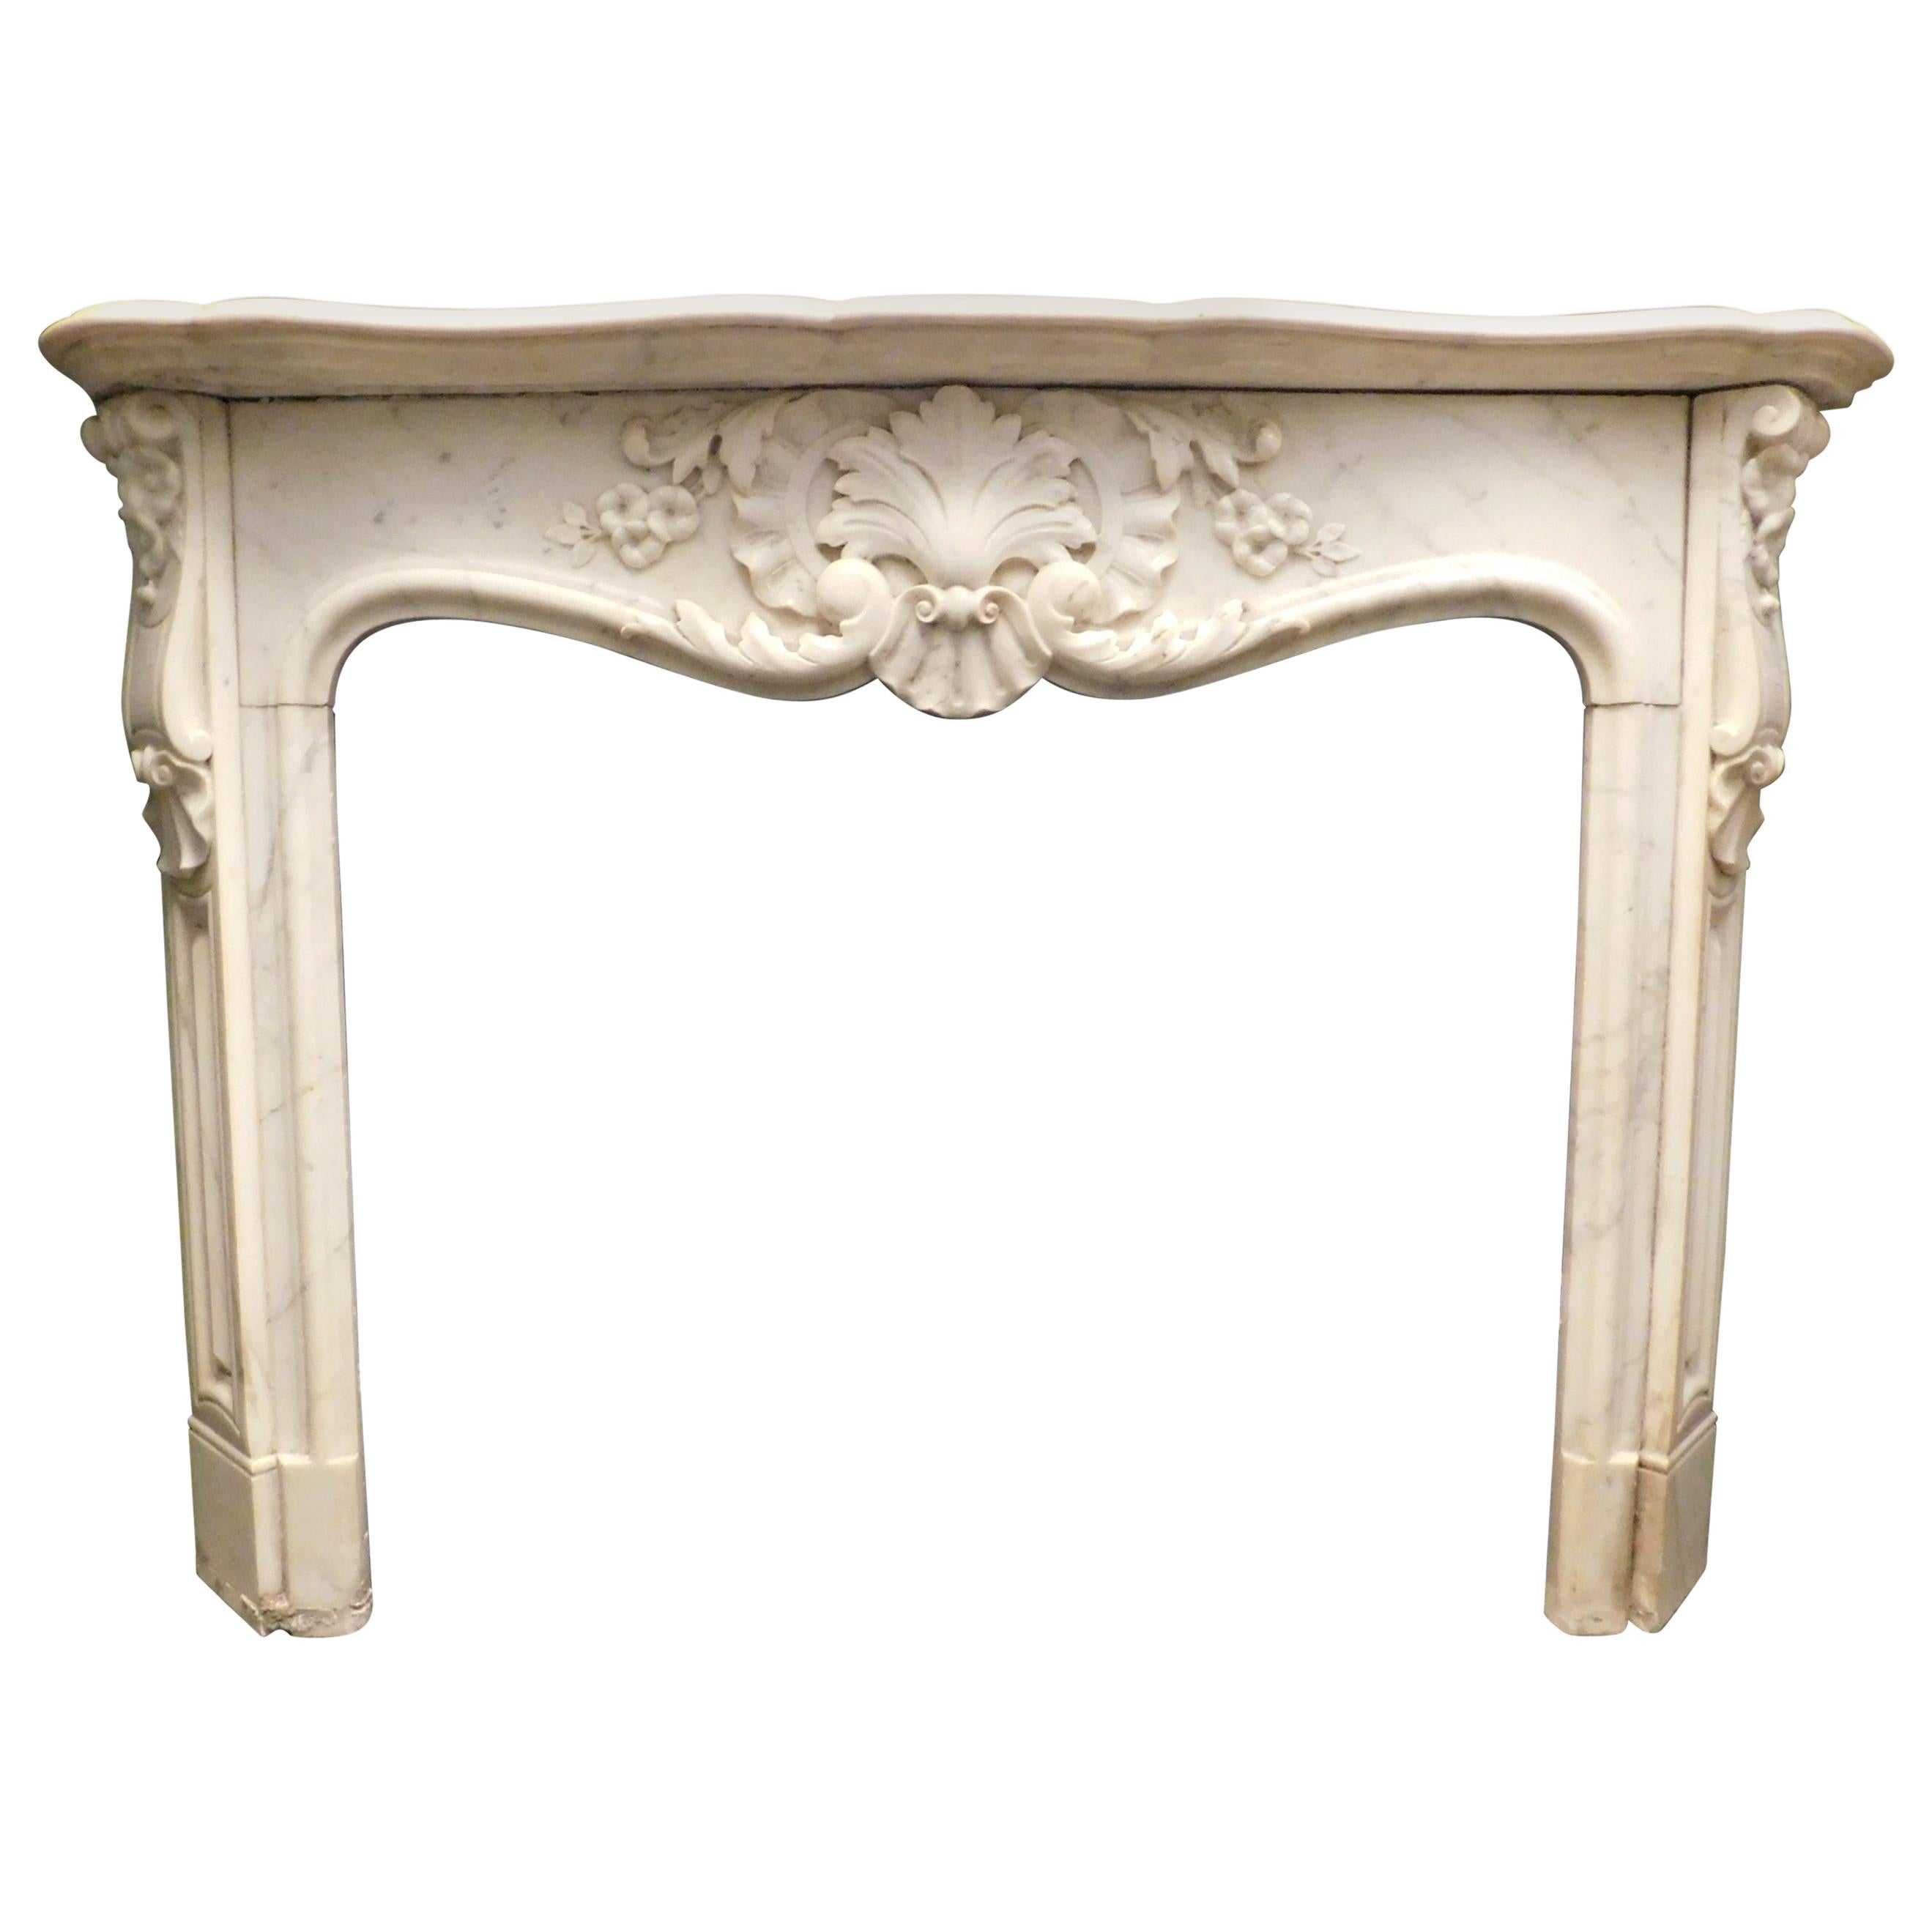 Antique Fireplace Mantel in White Carrara Marble, France, 1800